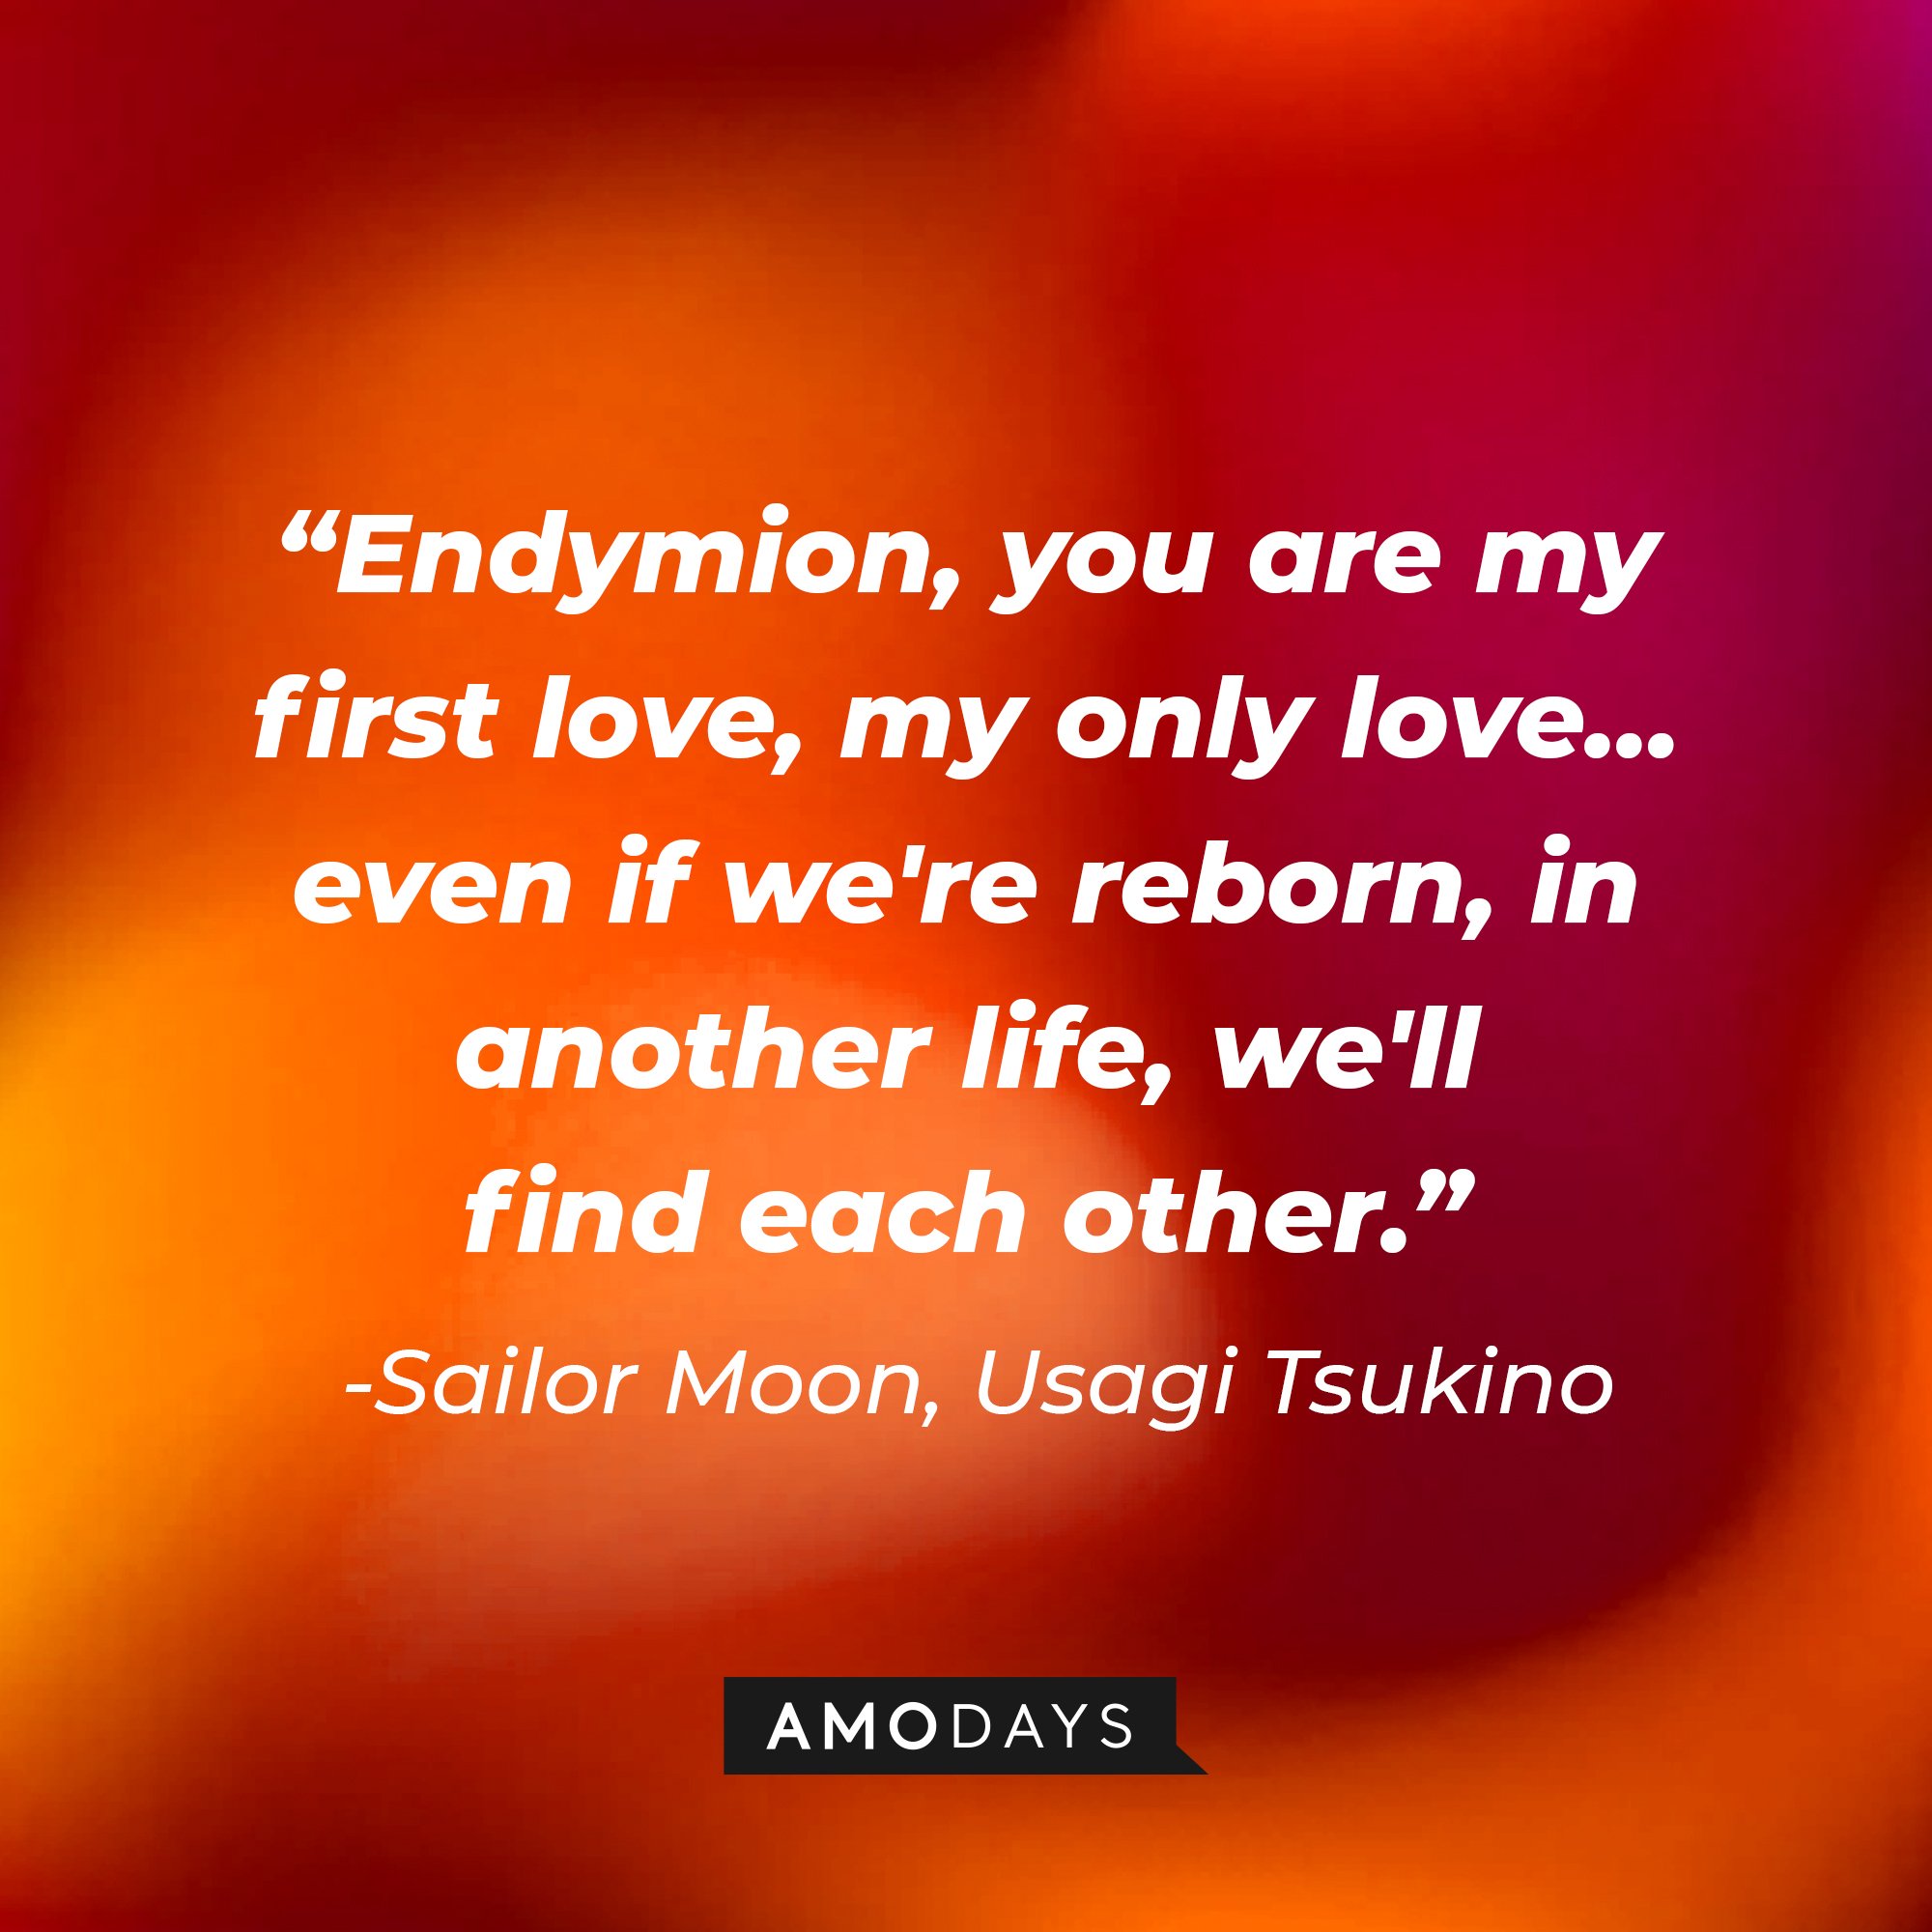 Sailor Moon/Usagi Tsukino’s quote: “Endymion, you are my first love, my only love… even if we’re reborn, in another life, we’ll find each other.”| Image: AmoDays